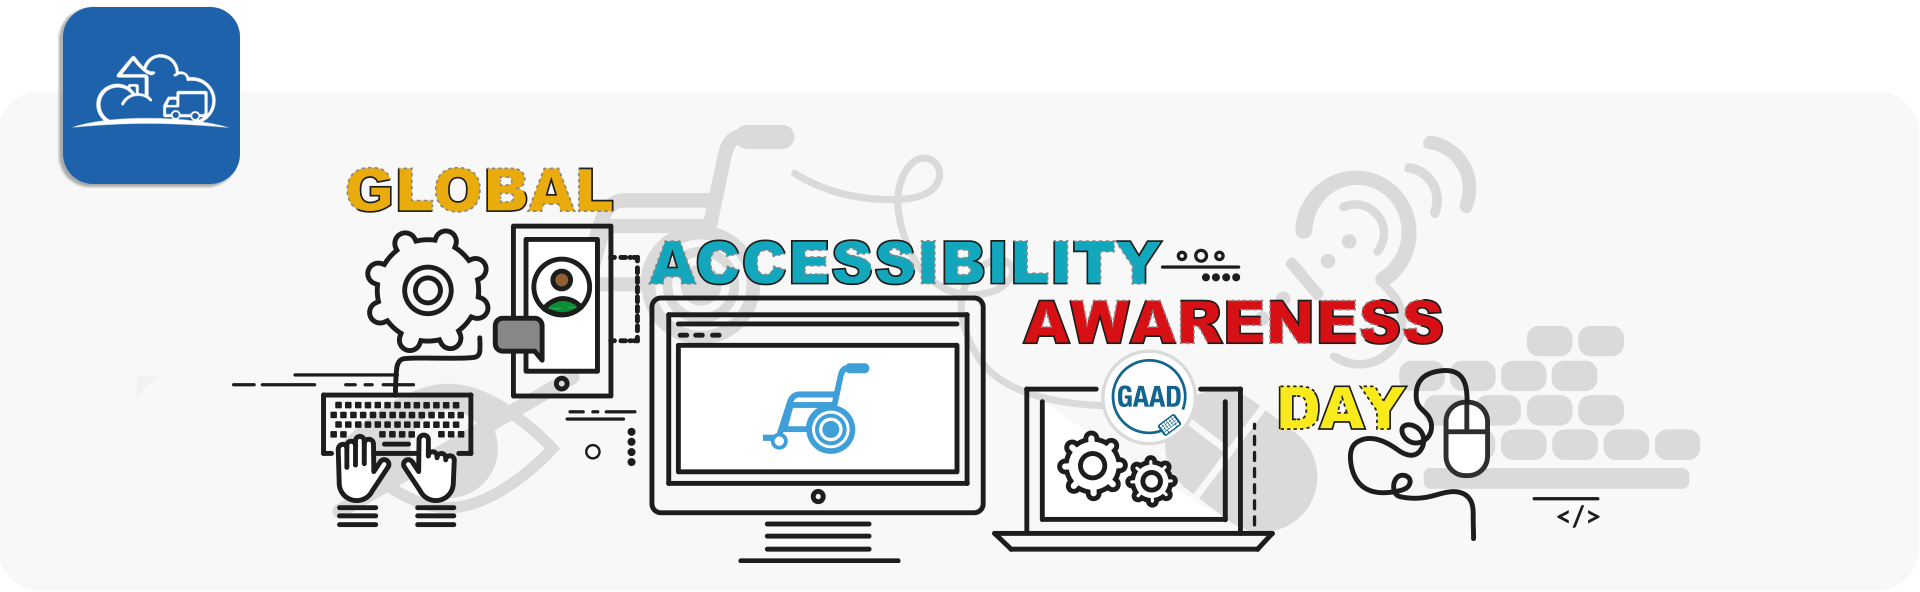 global accessibility awareness day banner